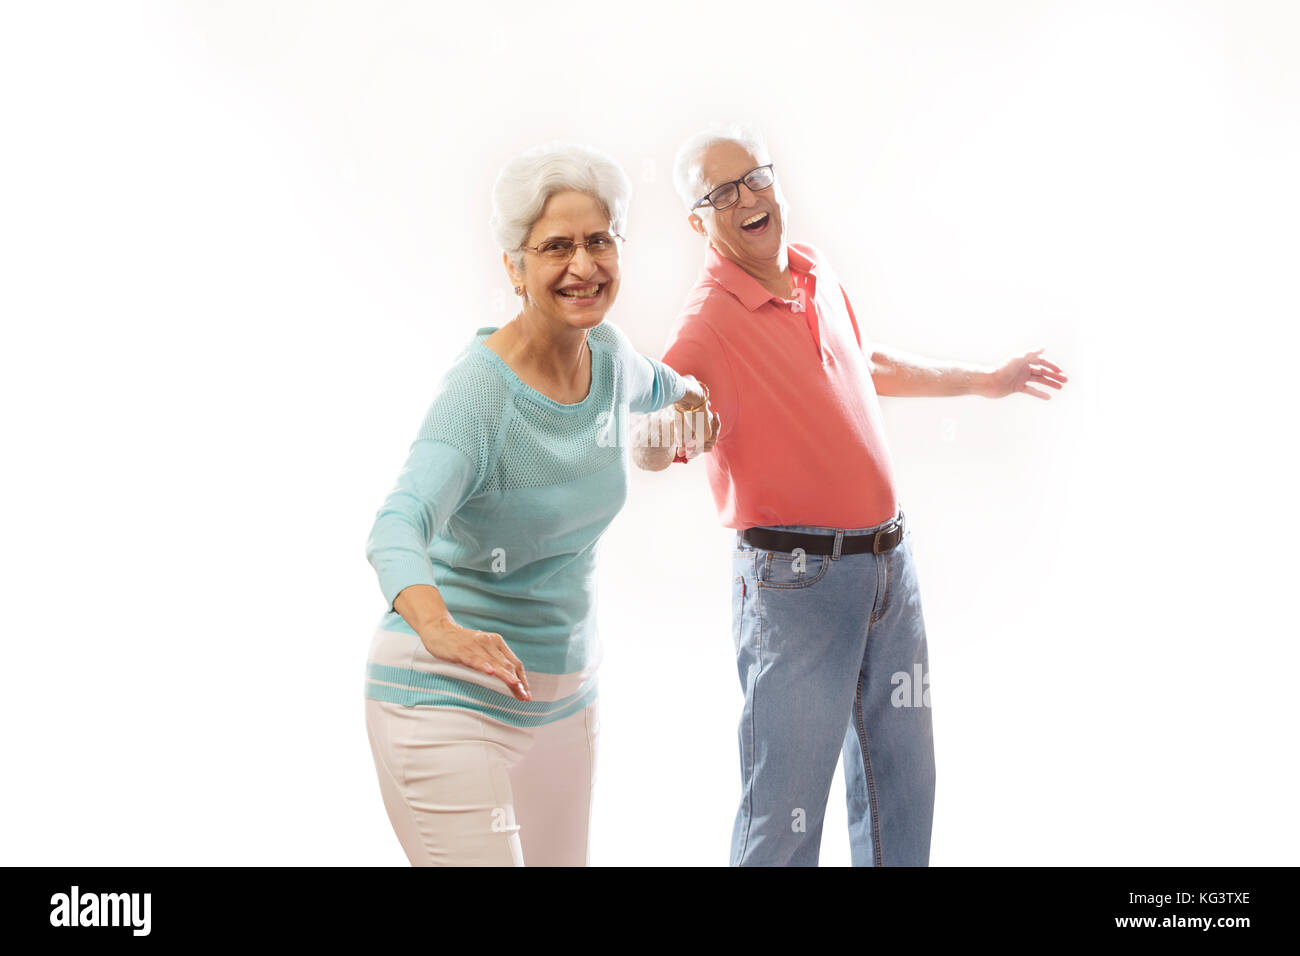 Smiling senior couple holding hands and dancing Banque D'Images